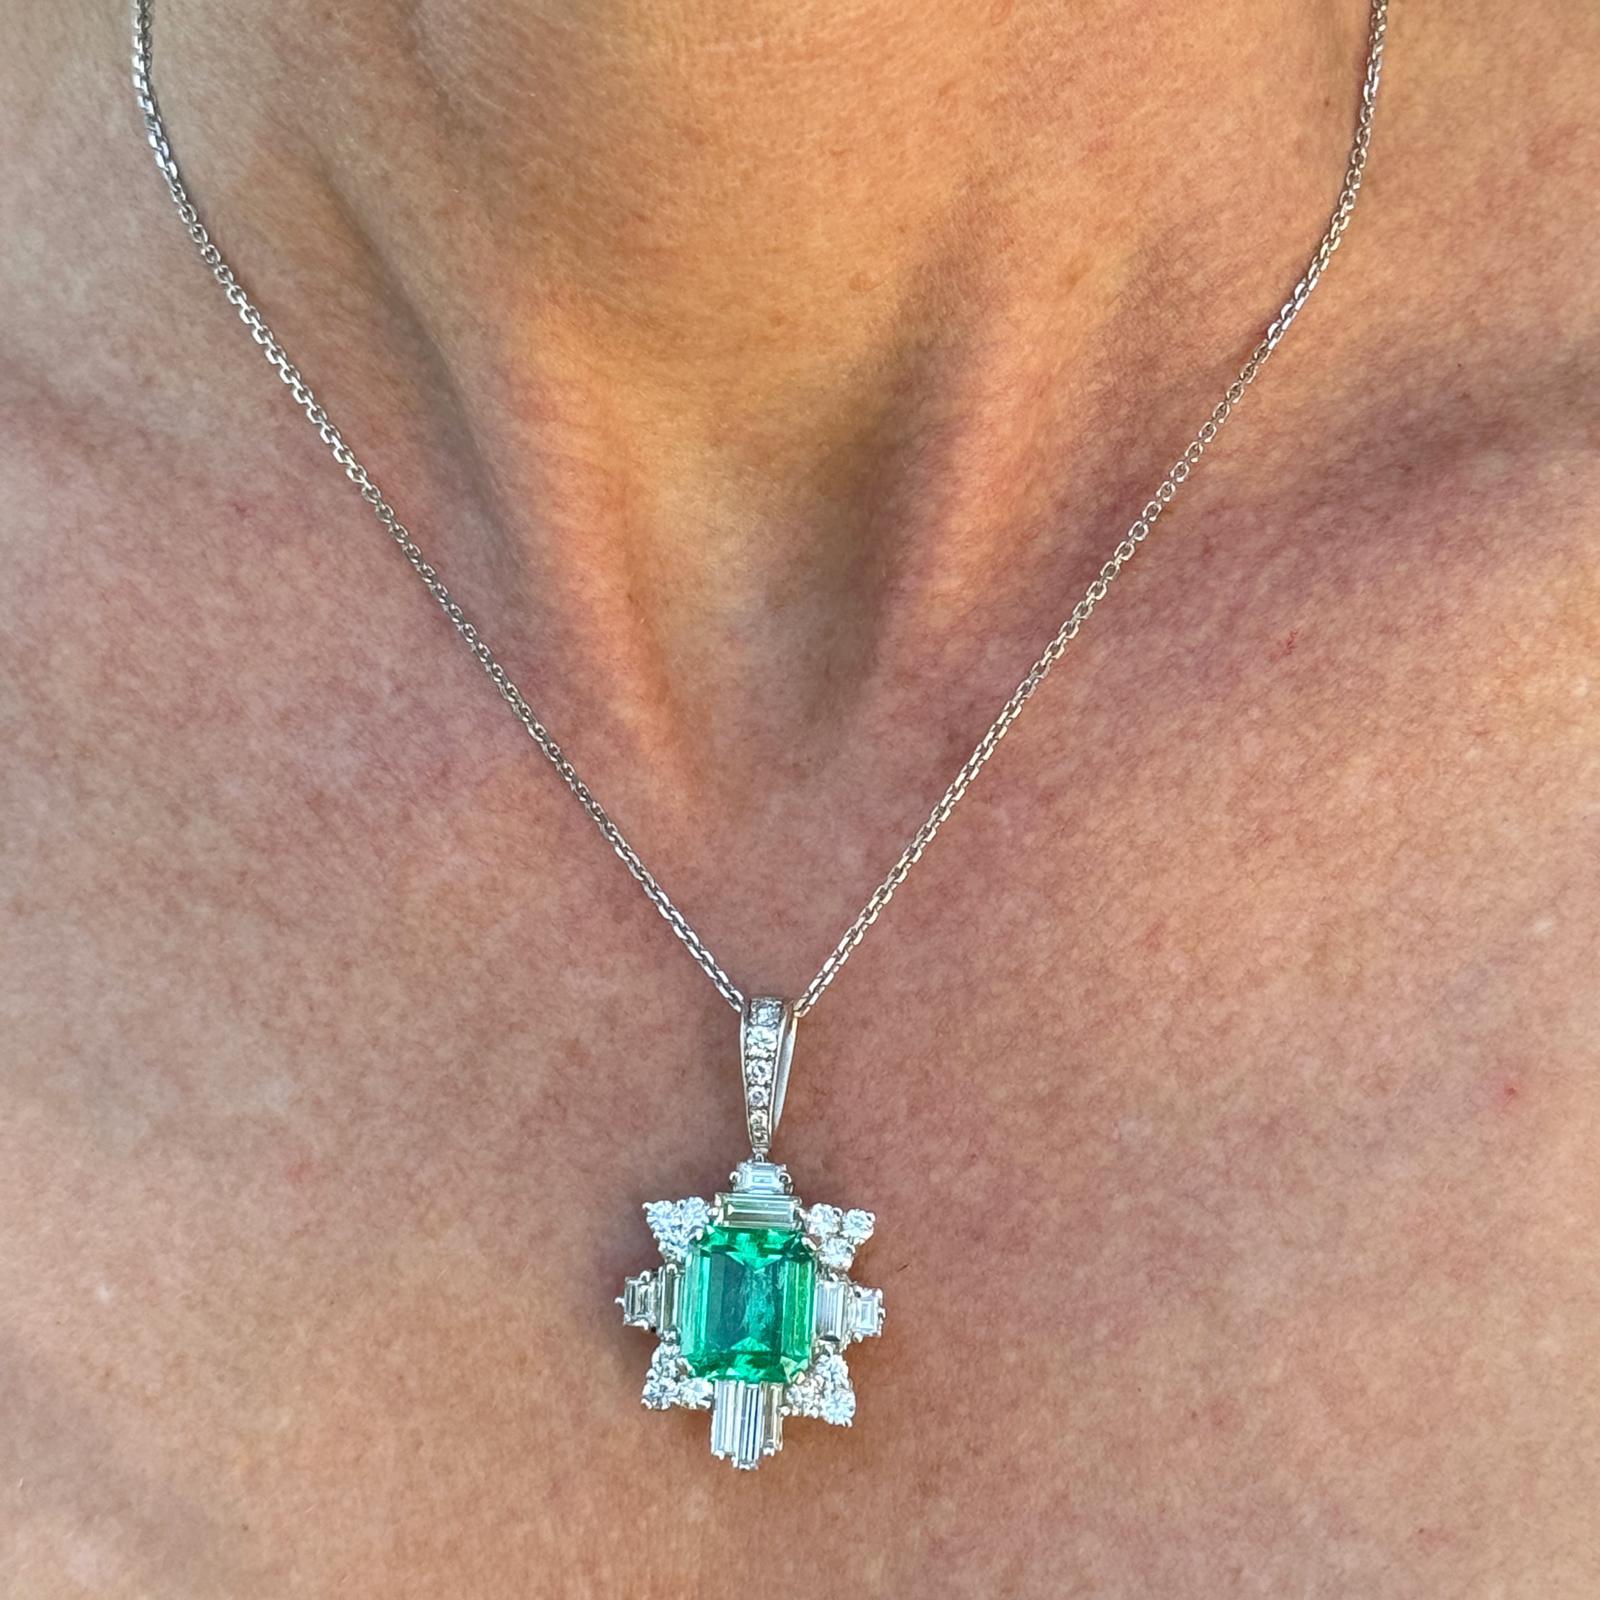 At the heart of this exquisite creation lies a magnificent Colombian emerald weighing 6.44 carats. This emerald possesses a rare and captivating allure, drawing the eye with its unparalleled beauty and depth.Surrounding the emerald are geometrically